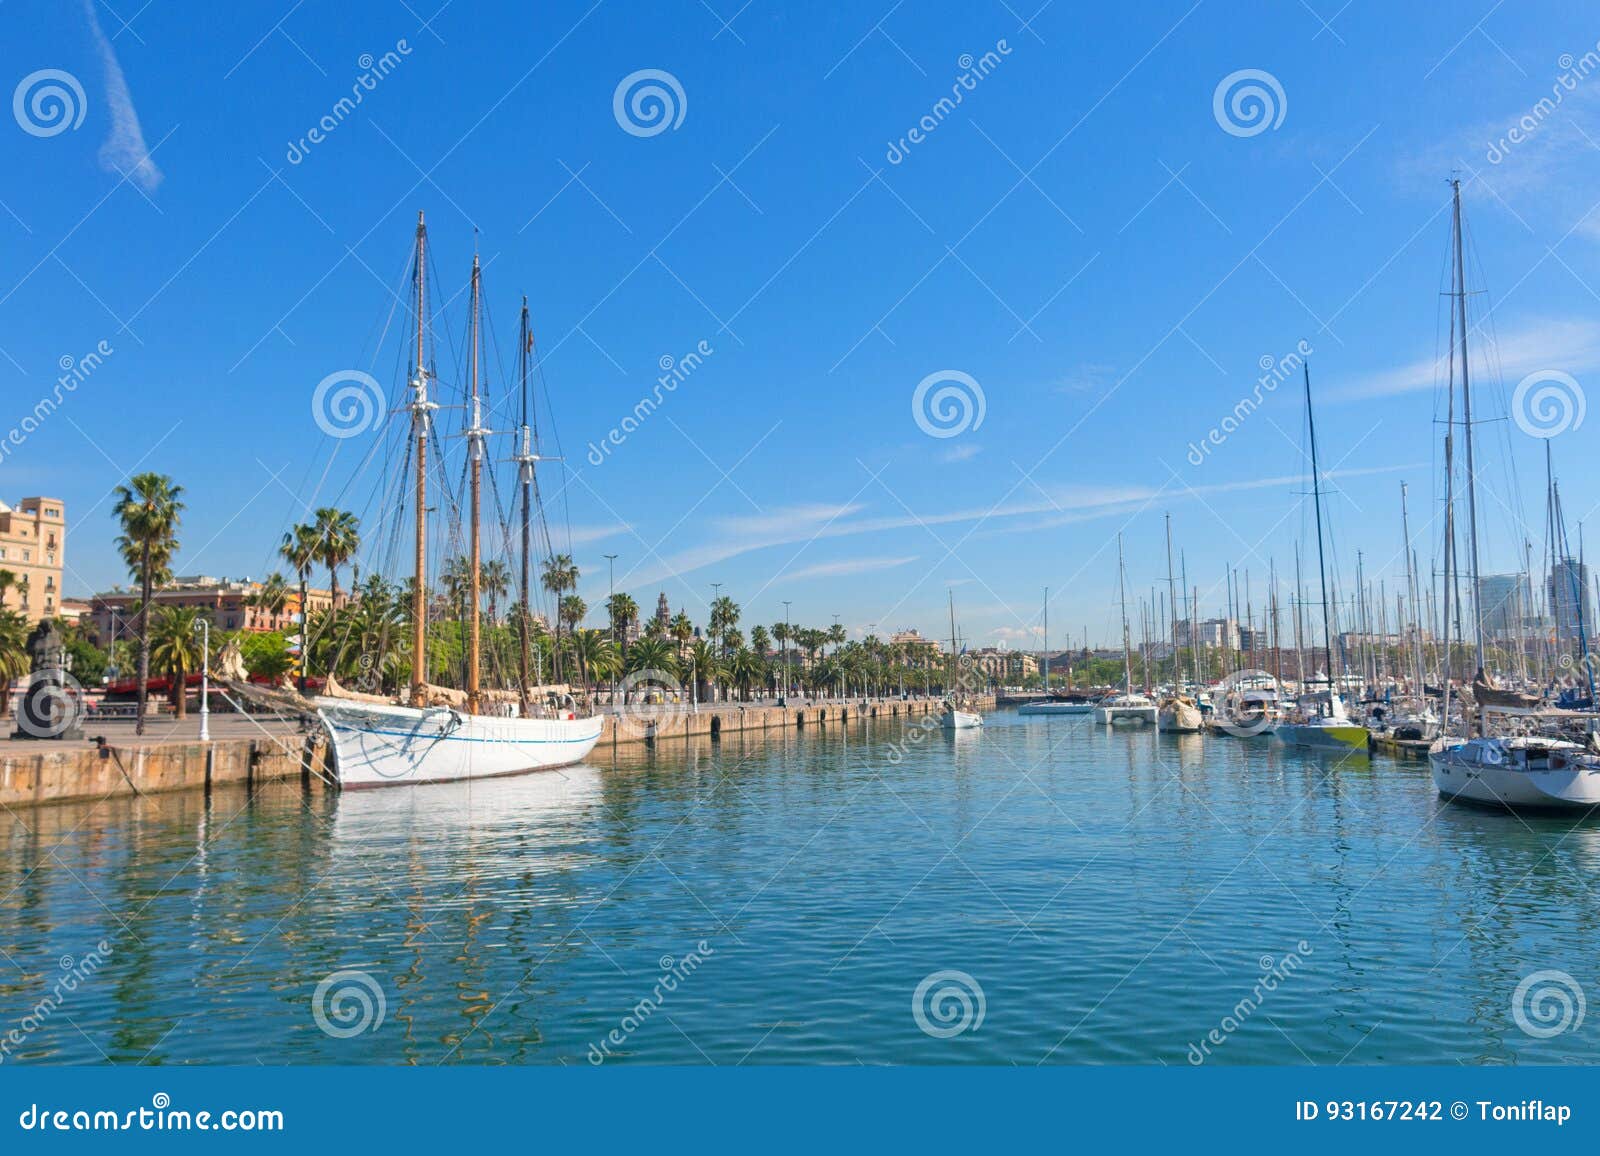 tourists stroll along the port next to santa eulalia in barcelona, spain